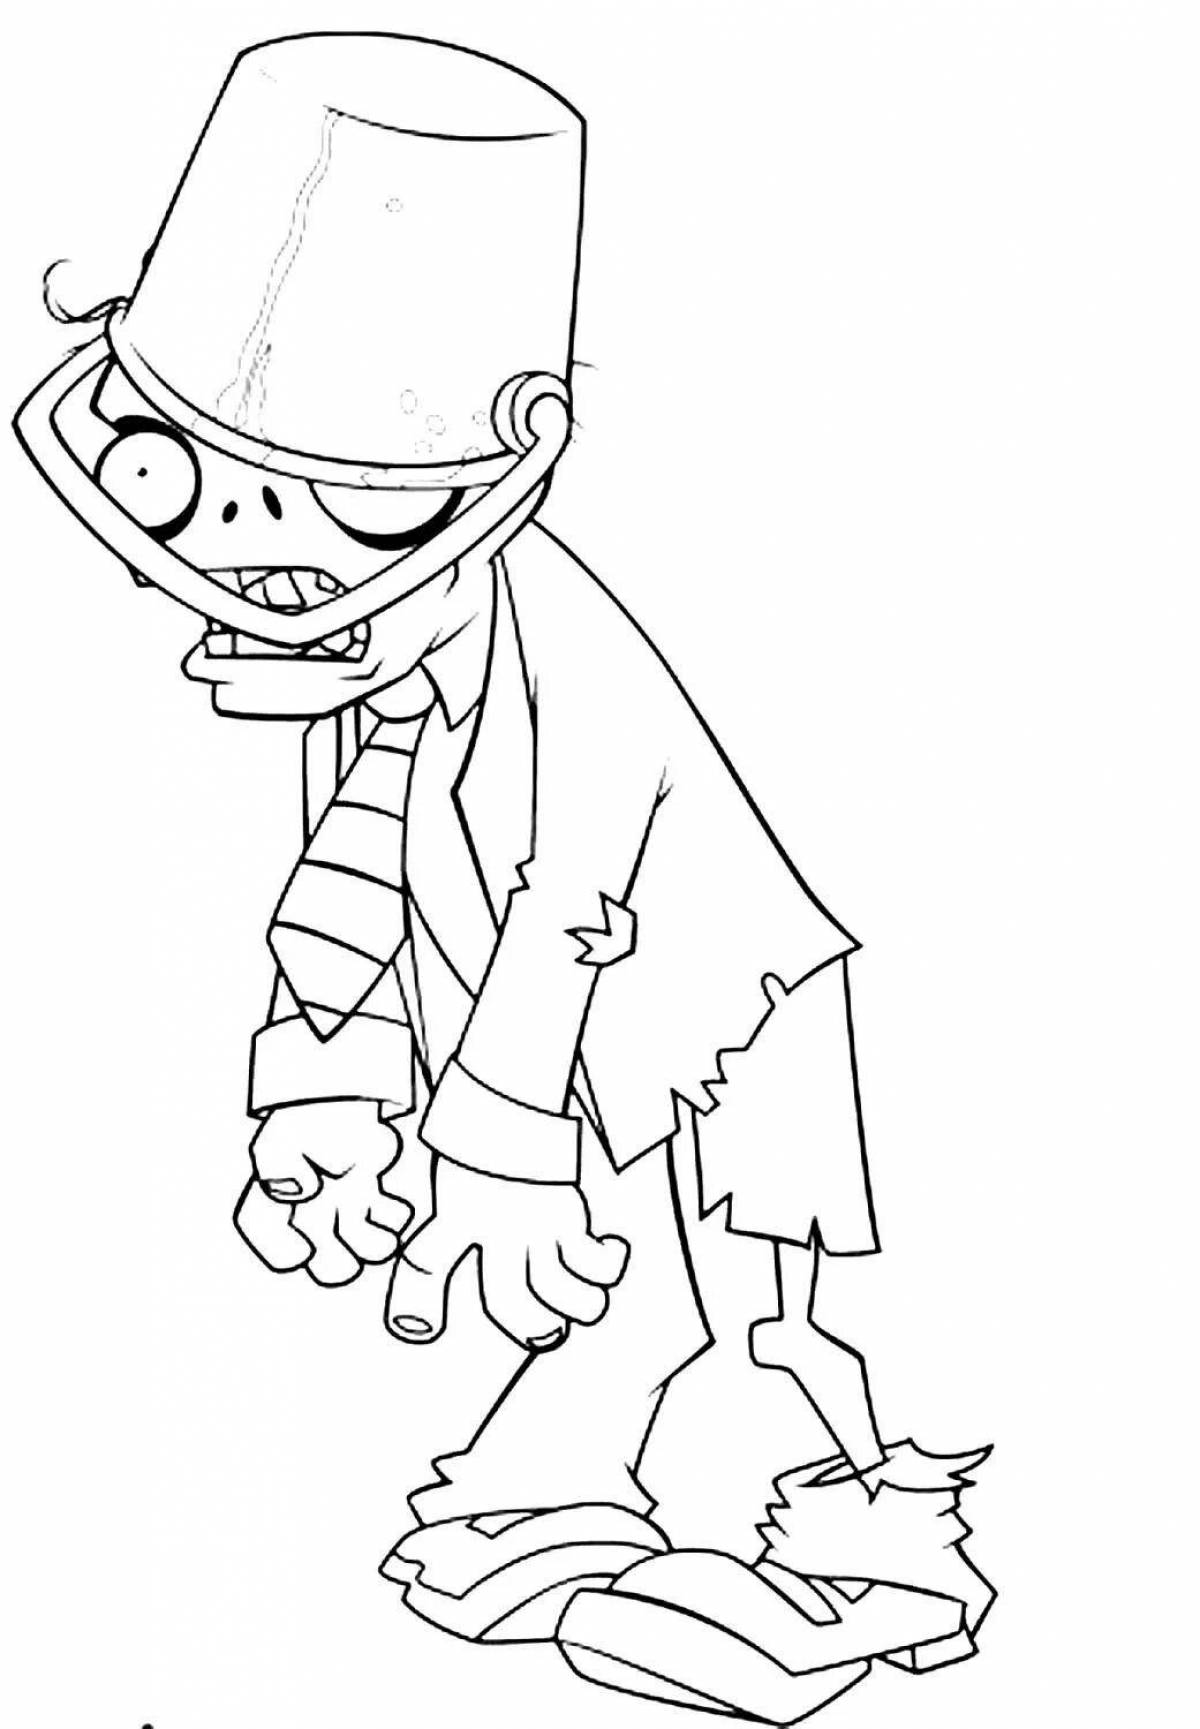 Zombie planet chilling coloring page